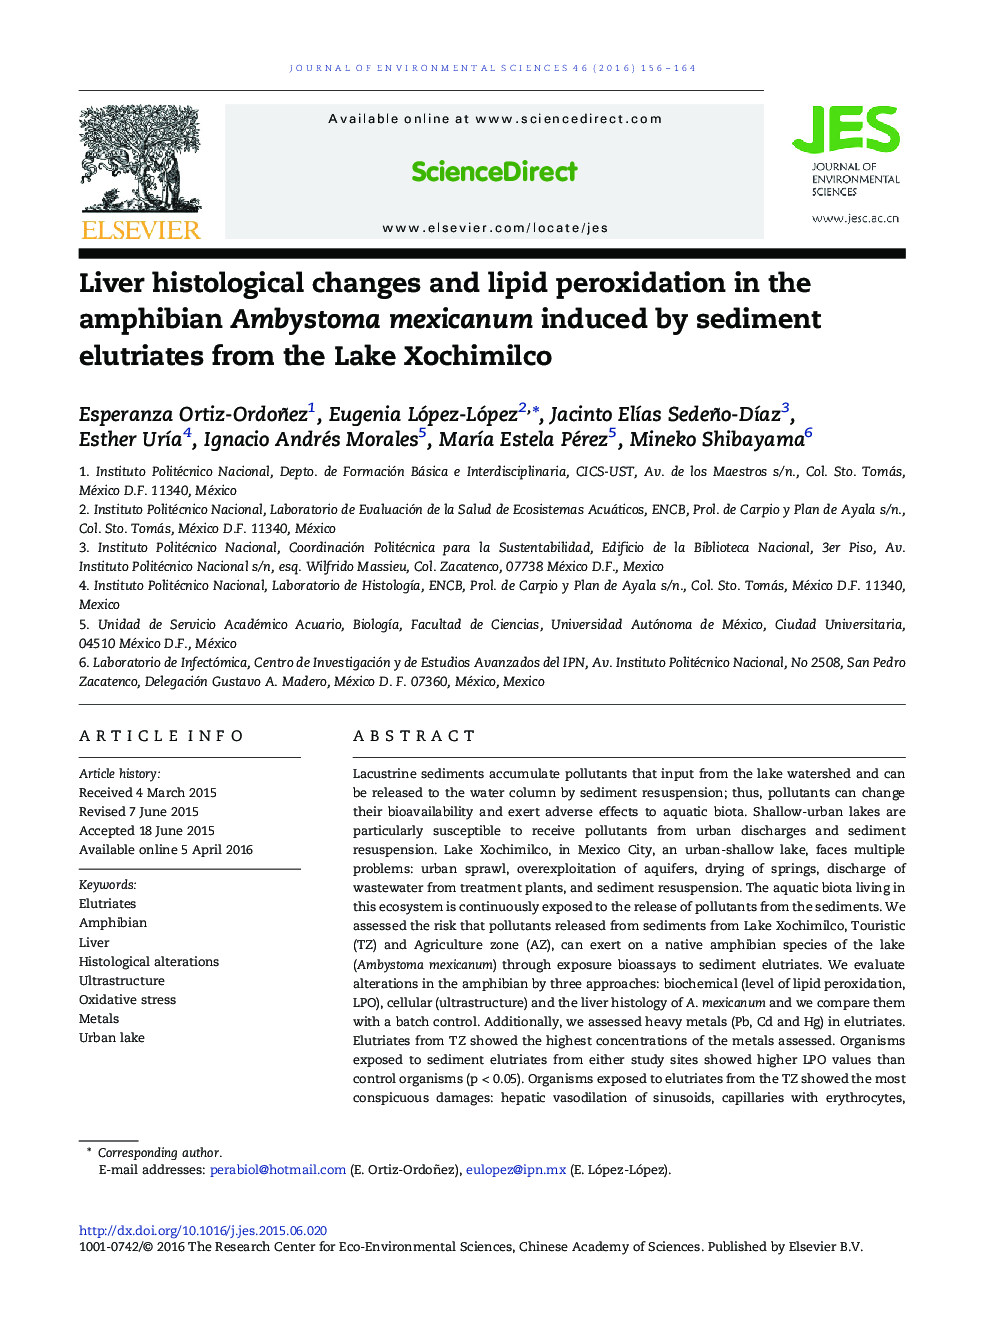 Liver histological changes and lipid peroxidation in the amphibian Ambystoma mexicanum induced by sediment elutriates from the Lake Xochimilco